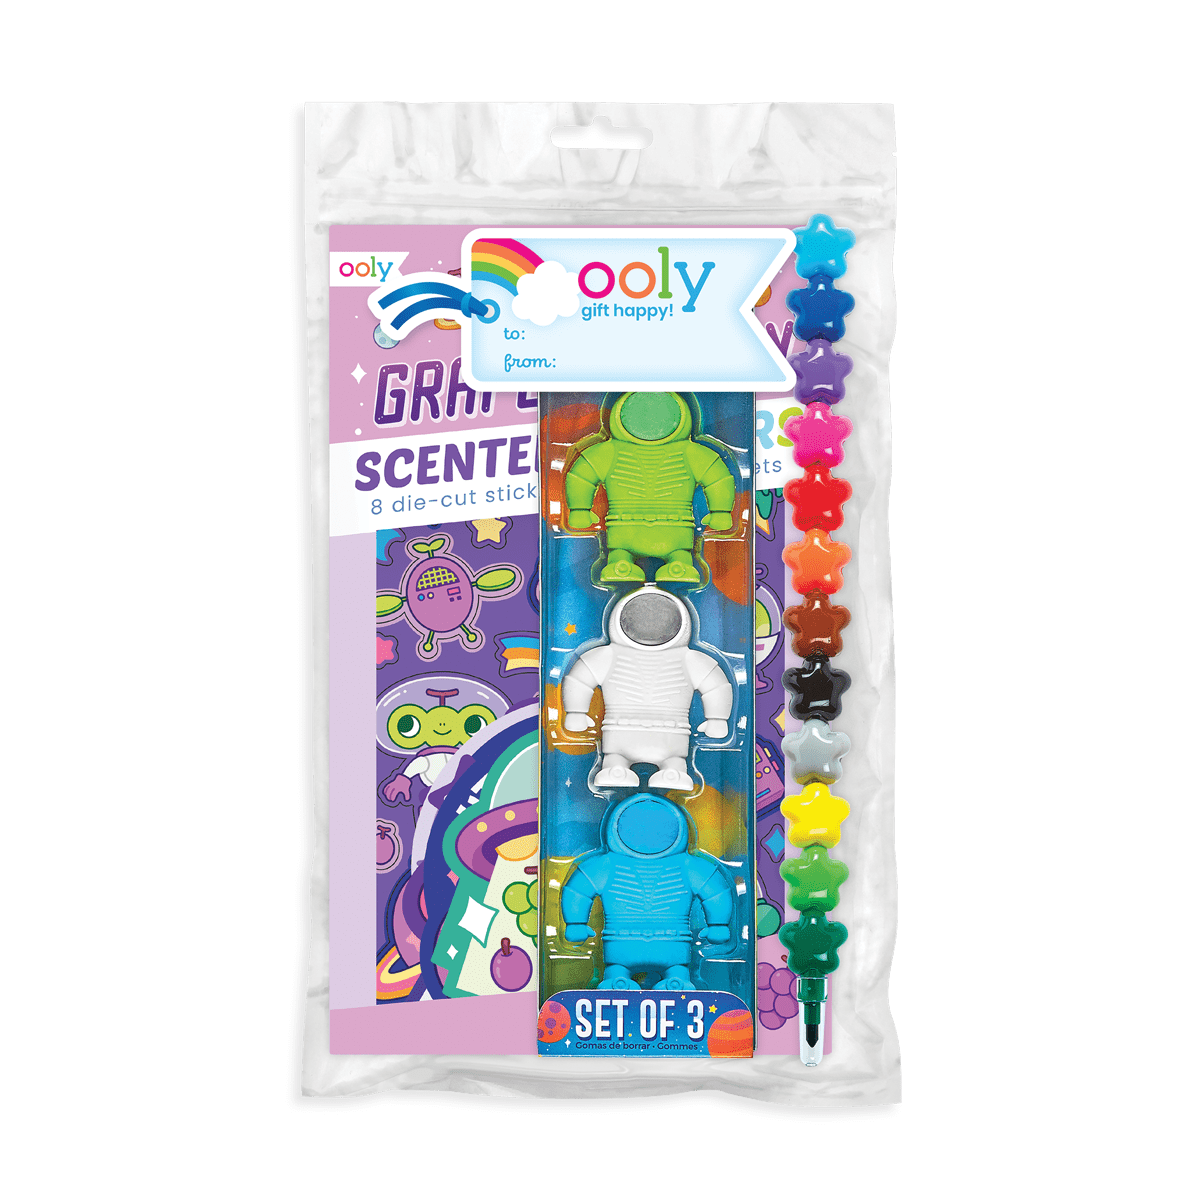 OOLY Galaxy Astronauts Happy Pack by OOLY